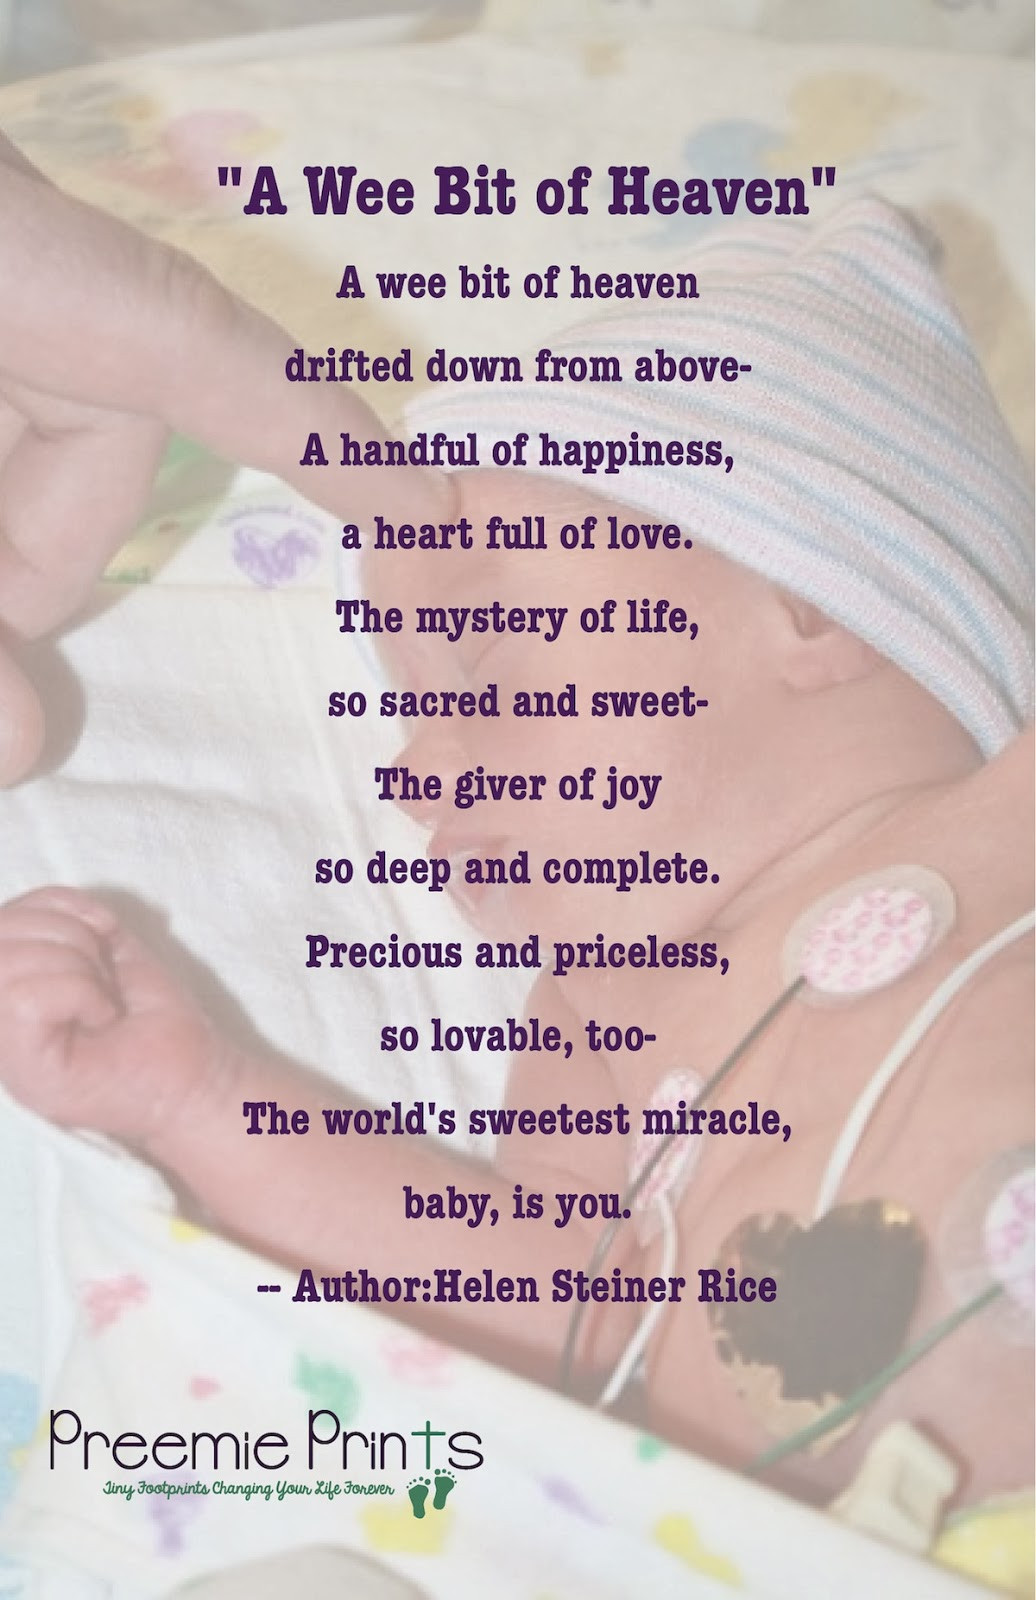 Premature Baby Quotes And Poems
 Preemie Prints Information Blog Poems Prayers & Quotes